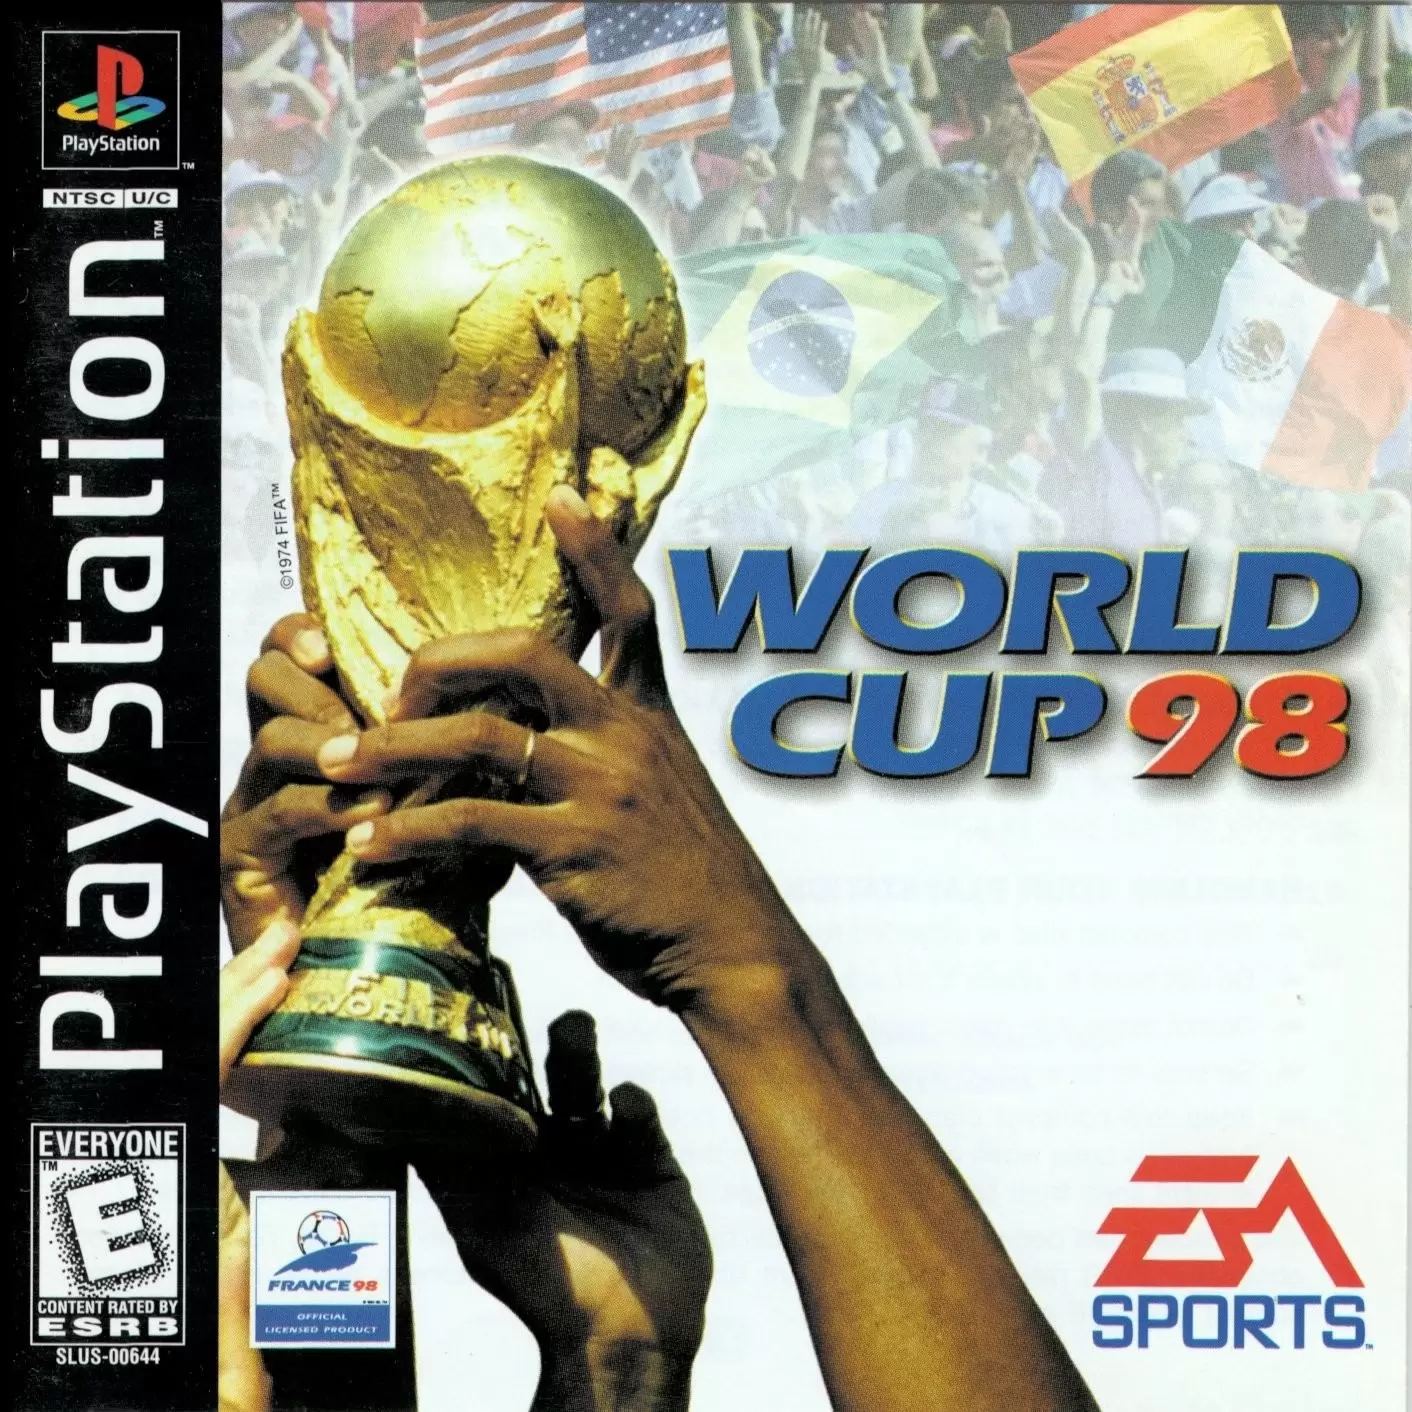 Playstation games - World Cup 98